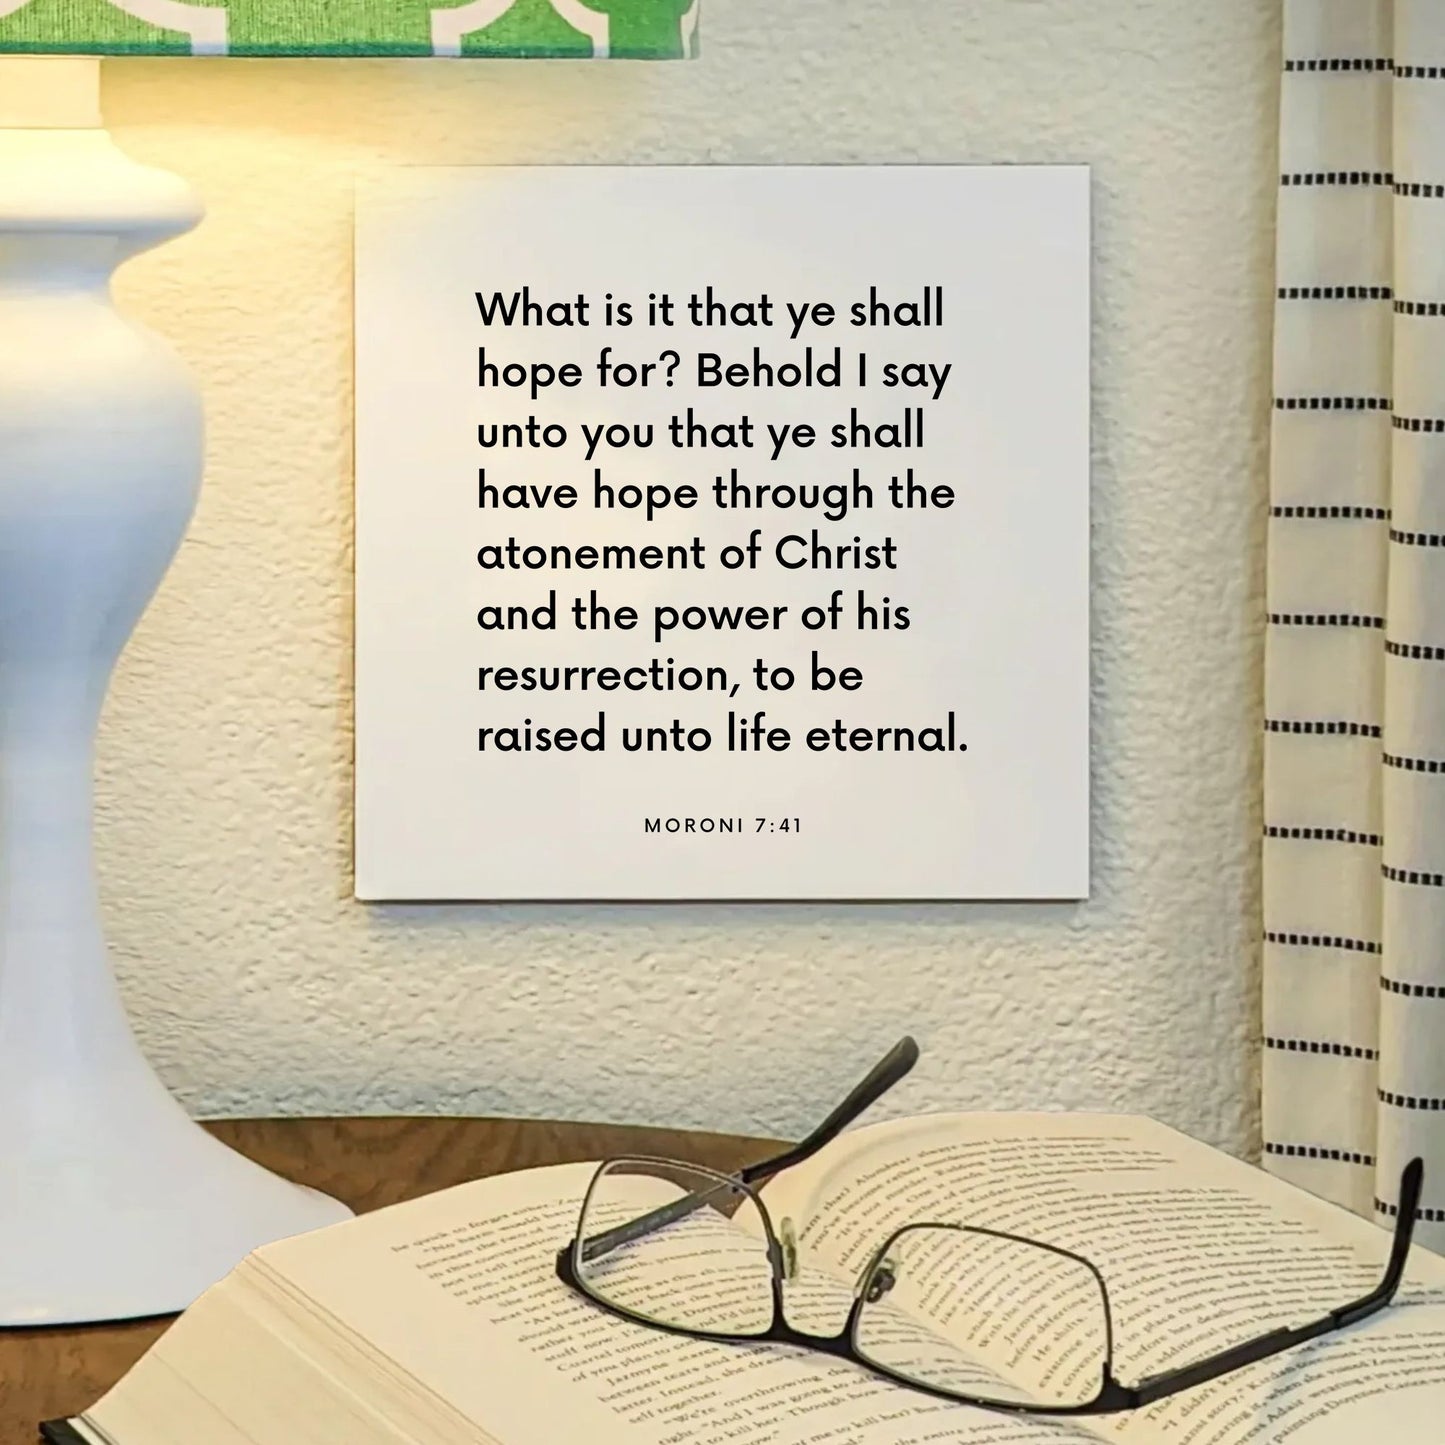 Lamp mouting of the scripture tile for Moroni 7:41 - "Ye shall have hope through the atonement of Christ"